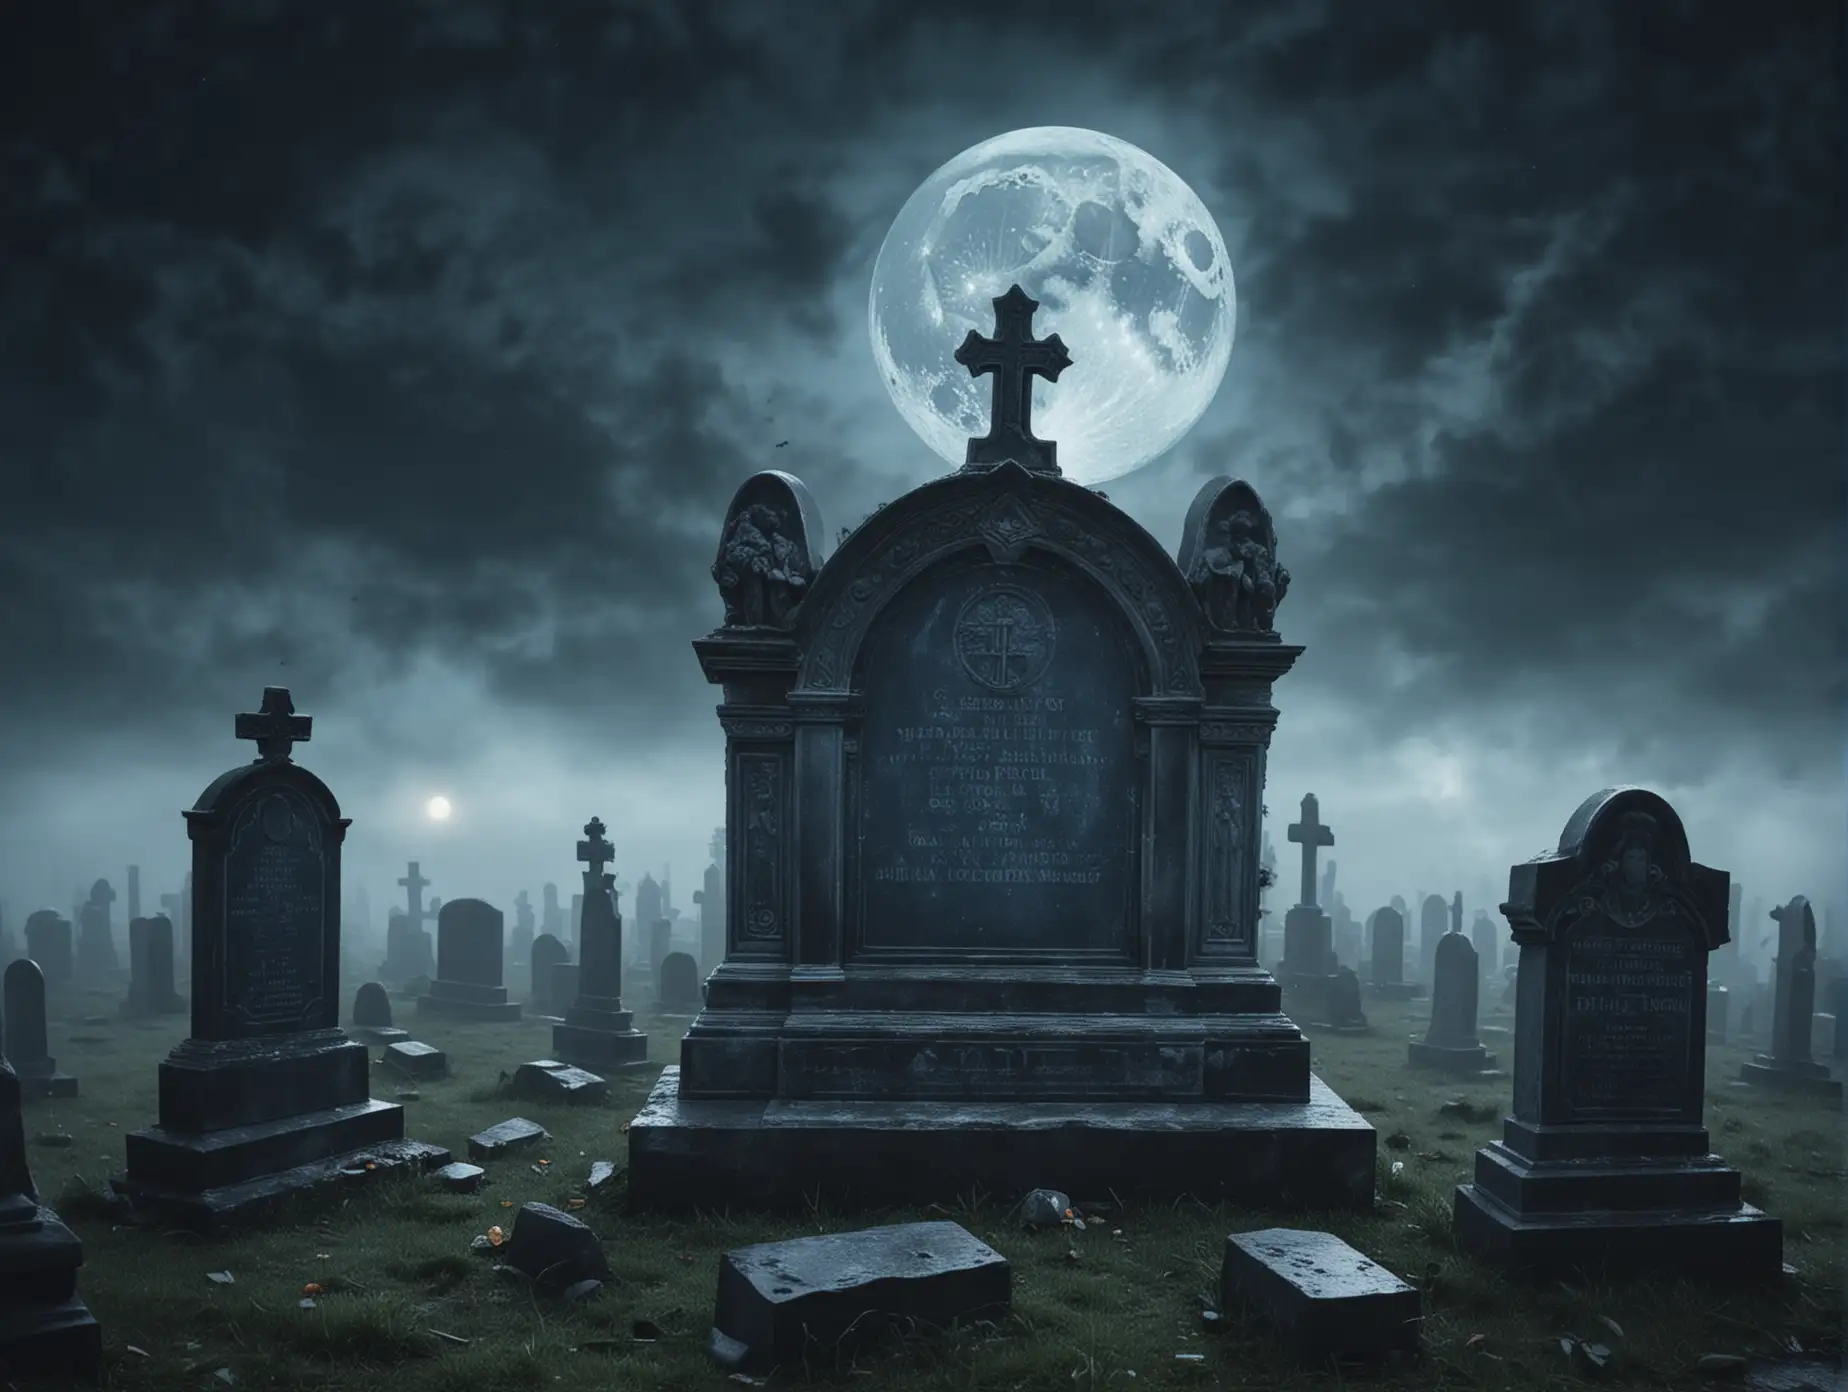 Gothic Cemetery Tomb with Malefic Moon and Mist